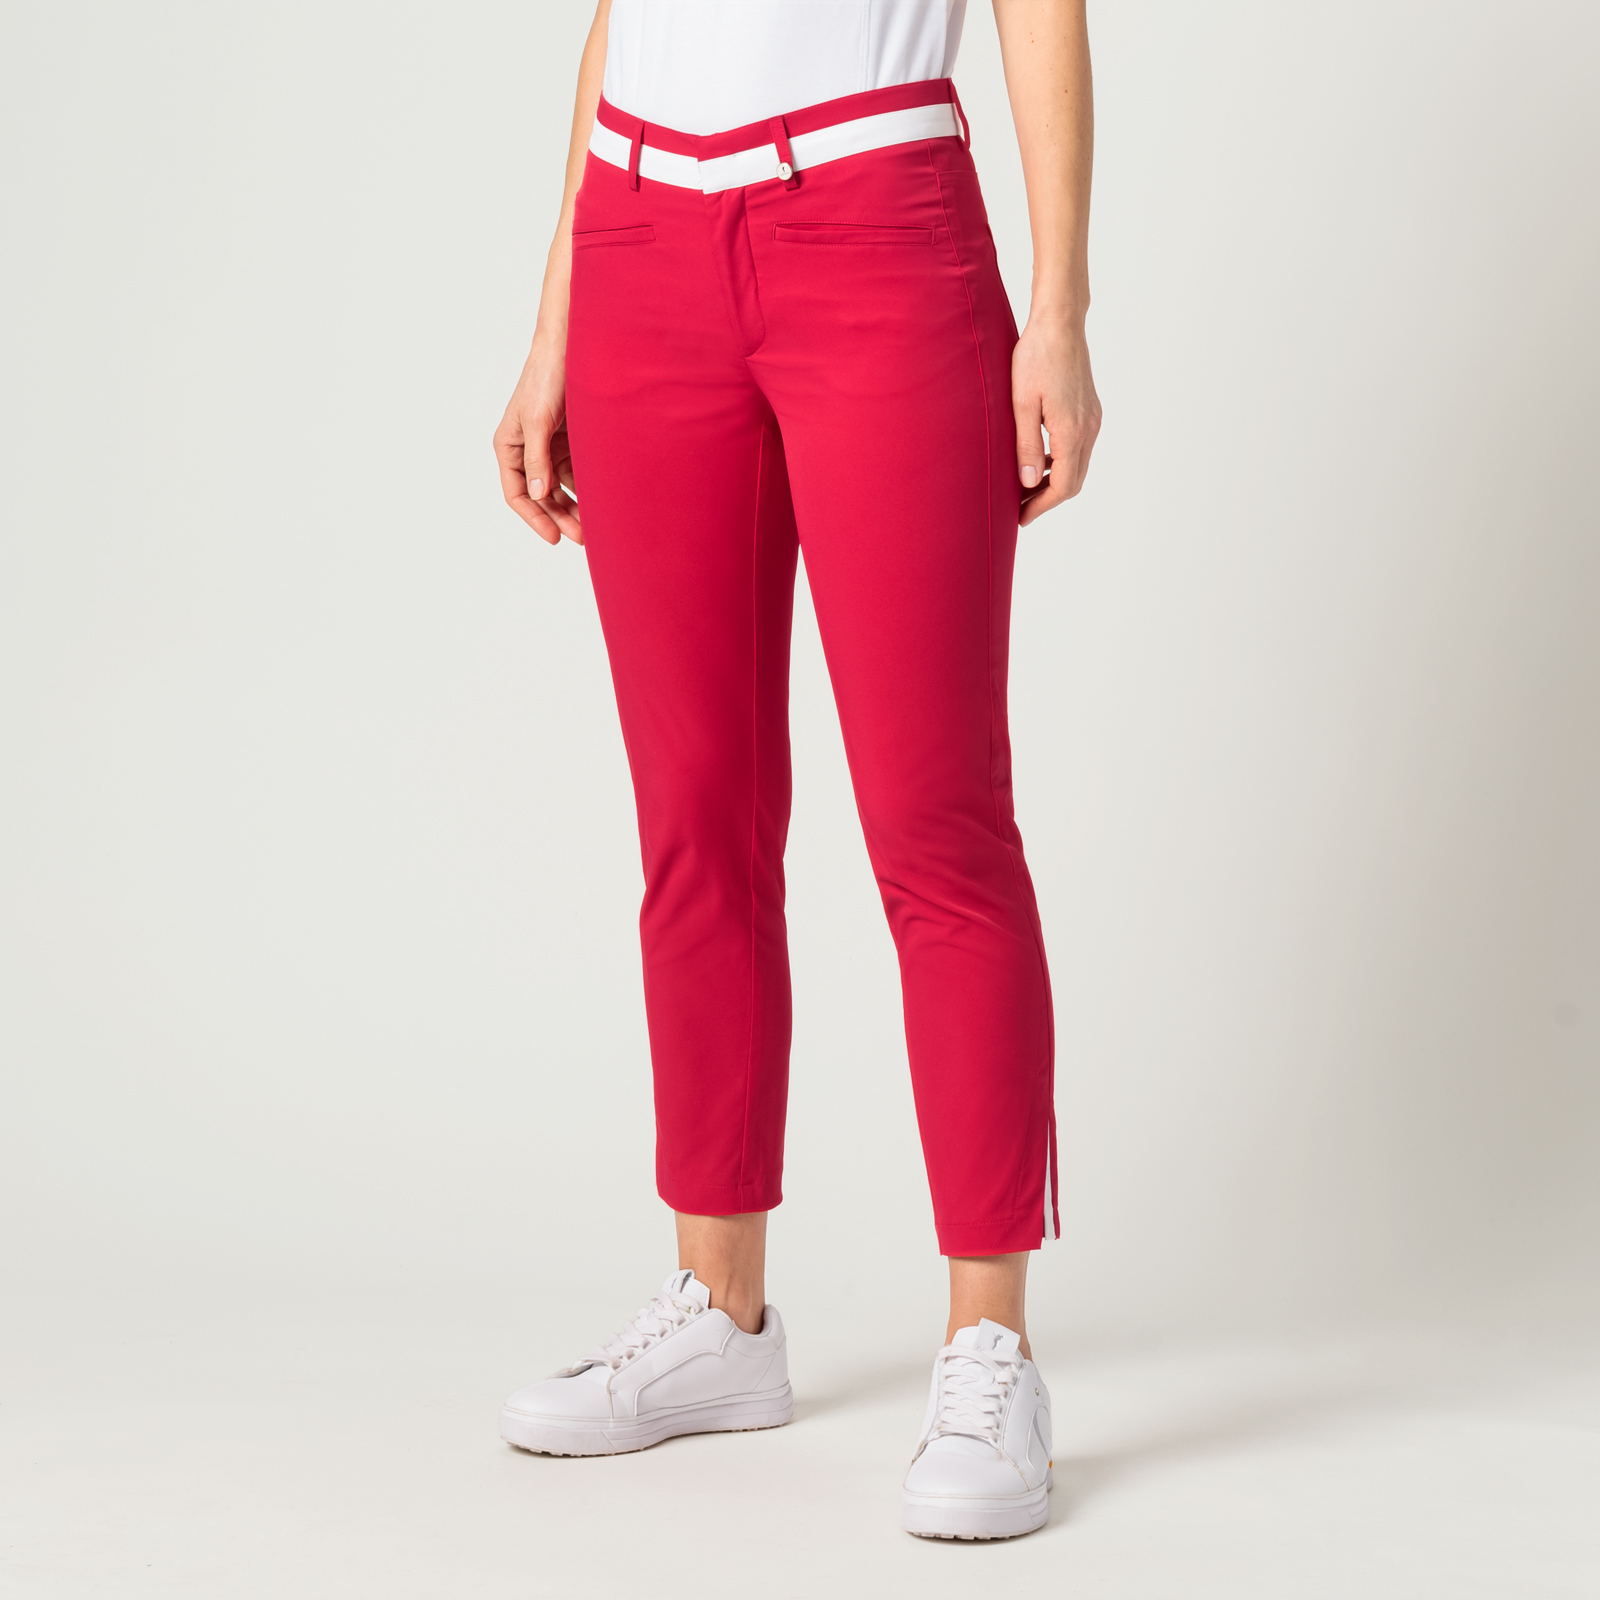 Ladies' stretch capri-style golf trousers with UV protection 